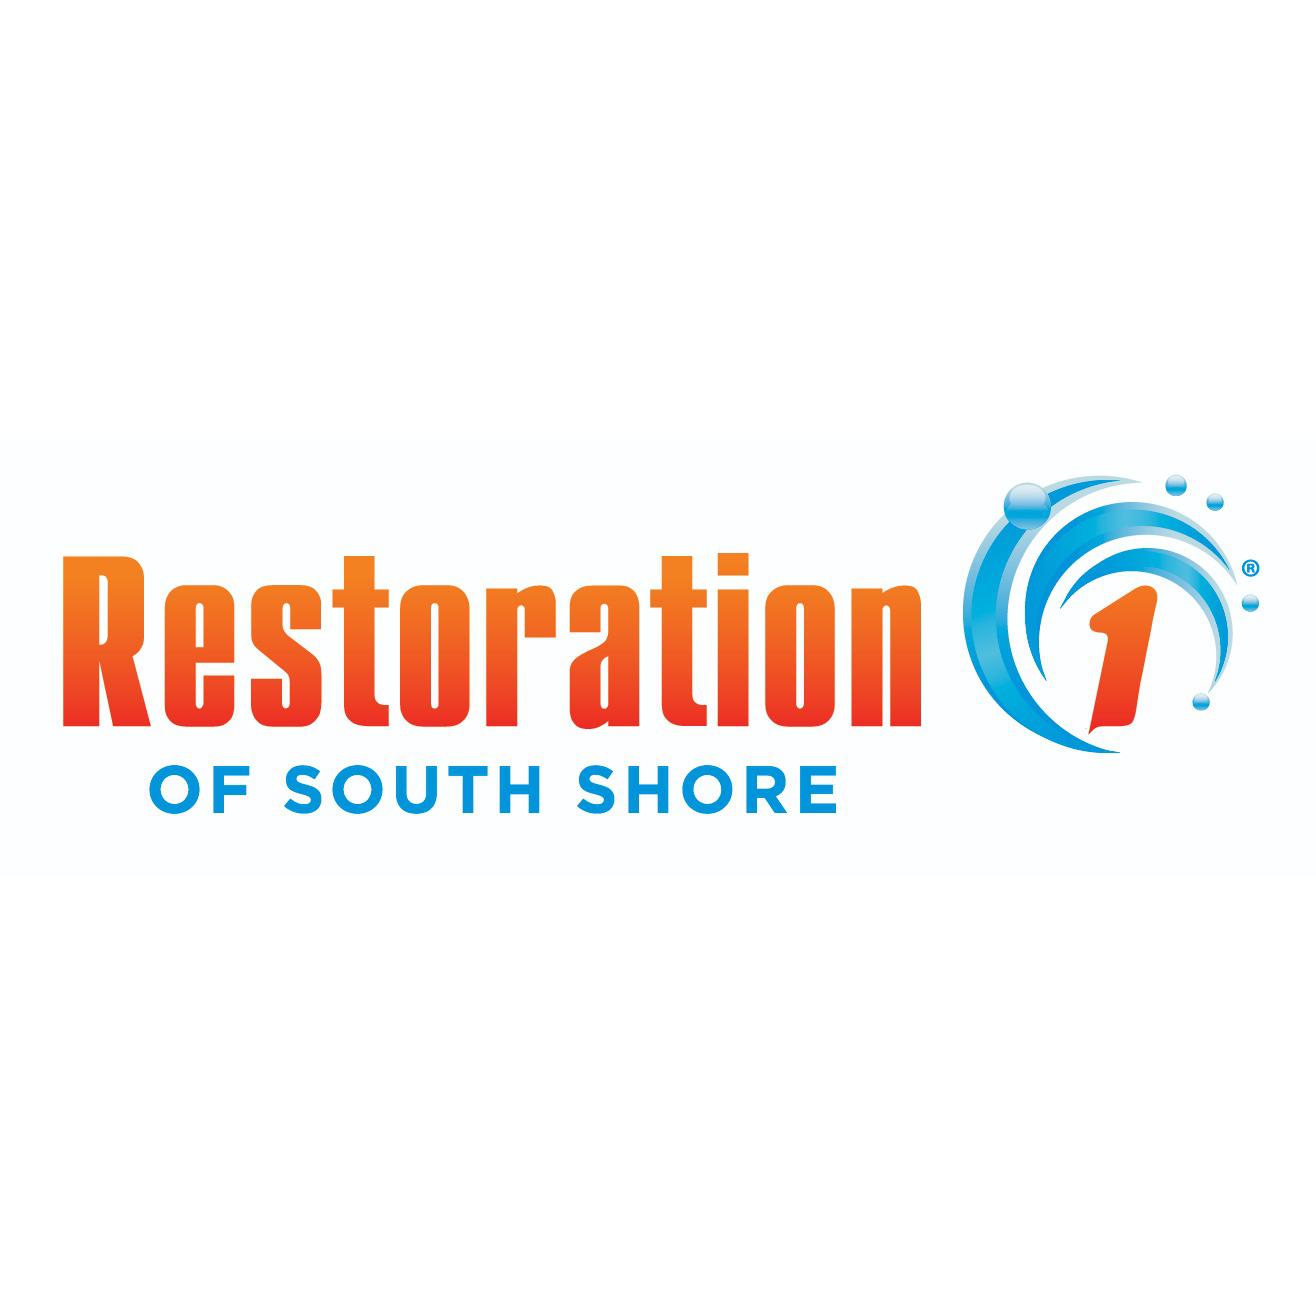 Restoration 1 of The South Shore